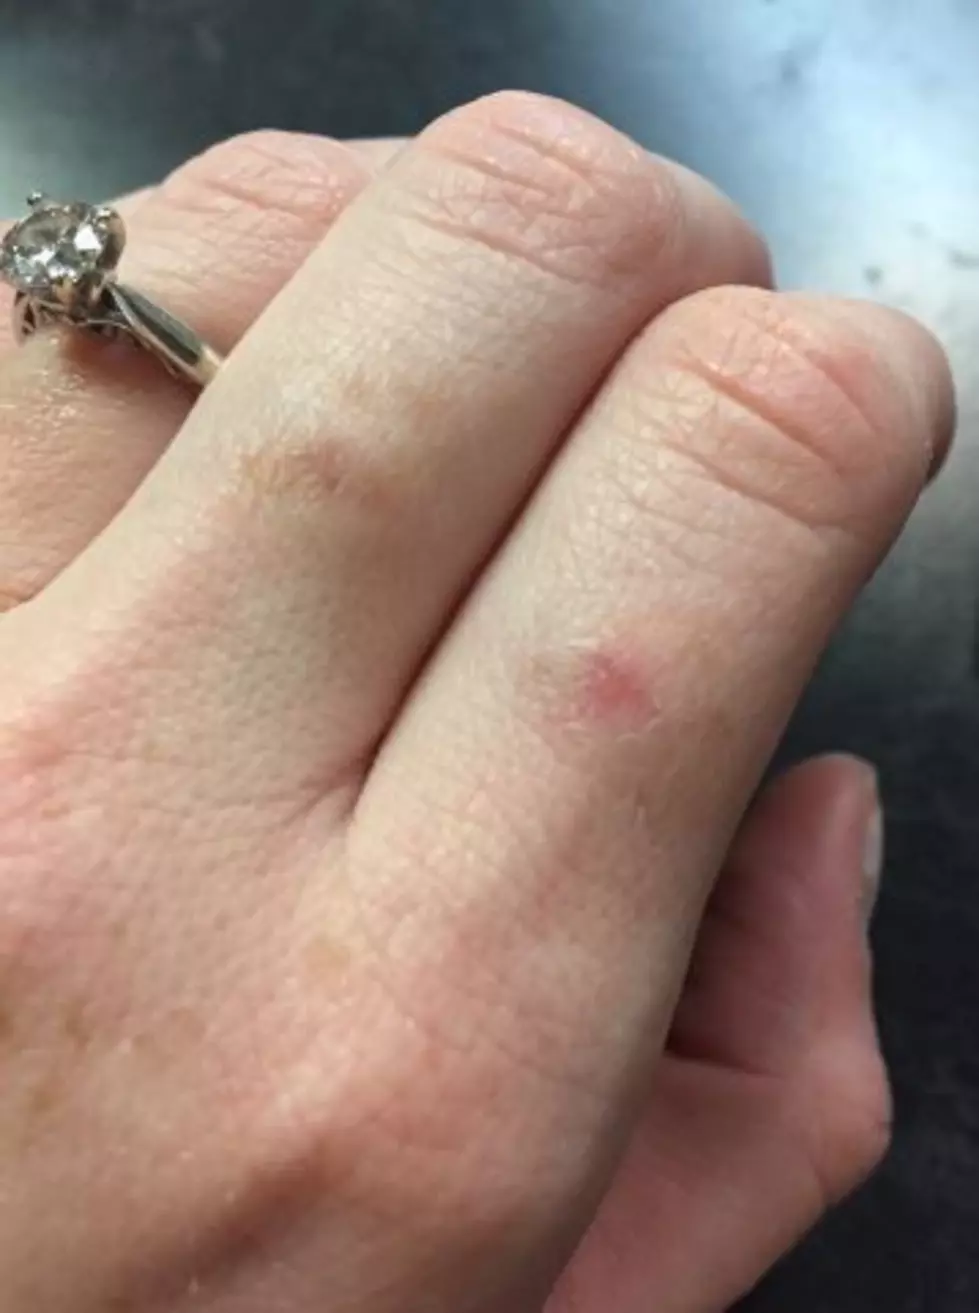 I Burned Myself Baking Yesterday&#8211;How Have You Hurt Yourself Cooking?